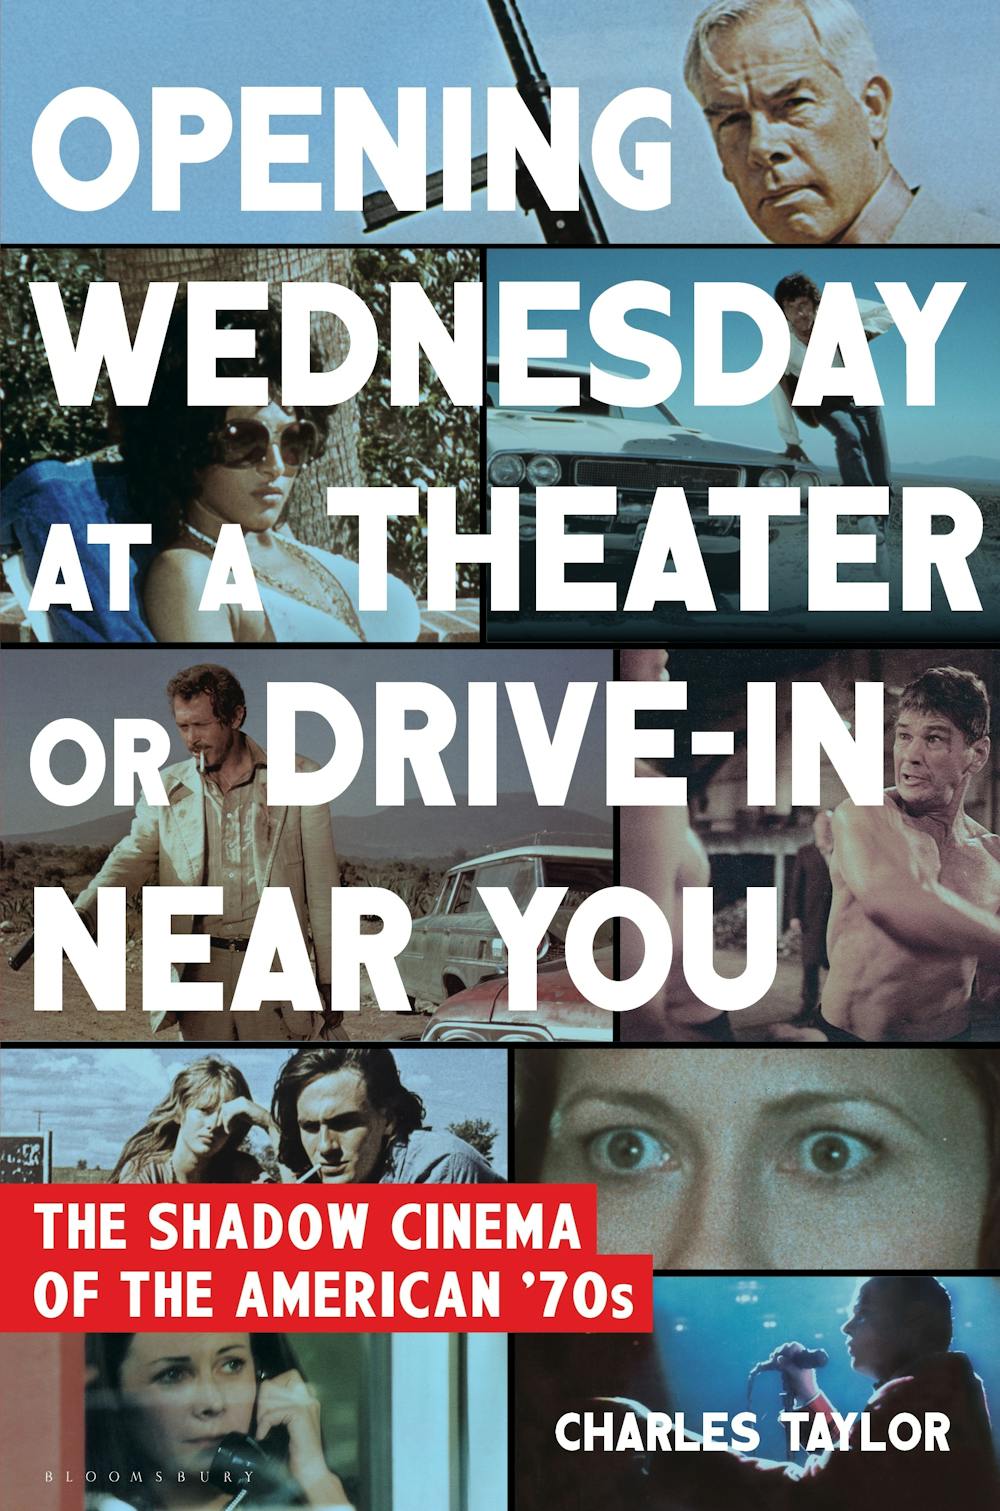 Opening Wednesday at a Theater Or Drive-In Near You - Tradebook for Courses